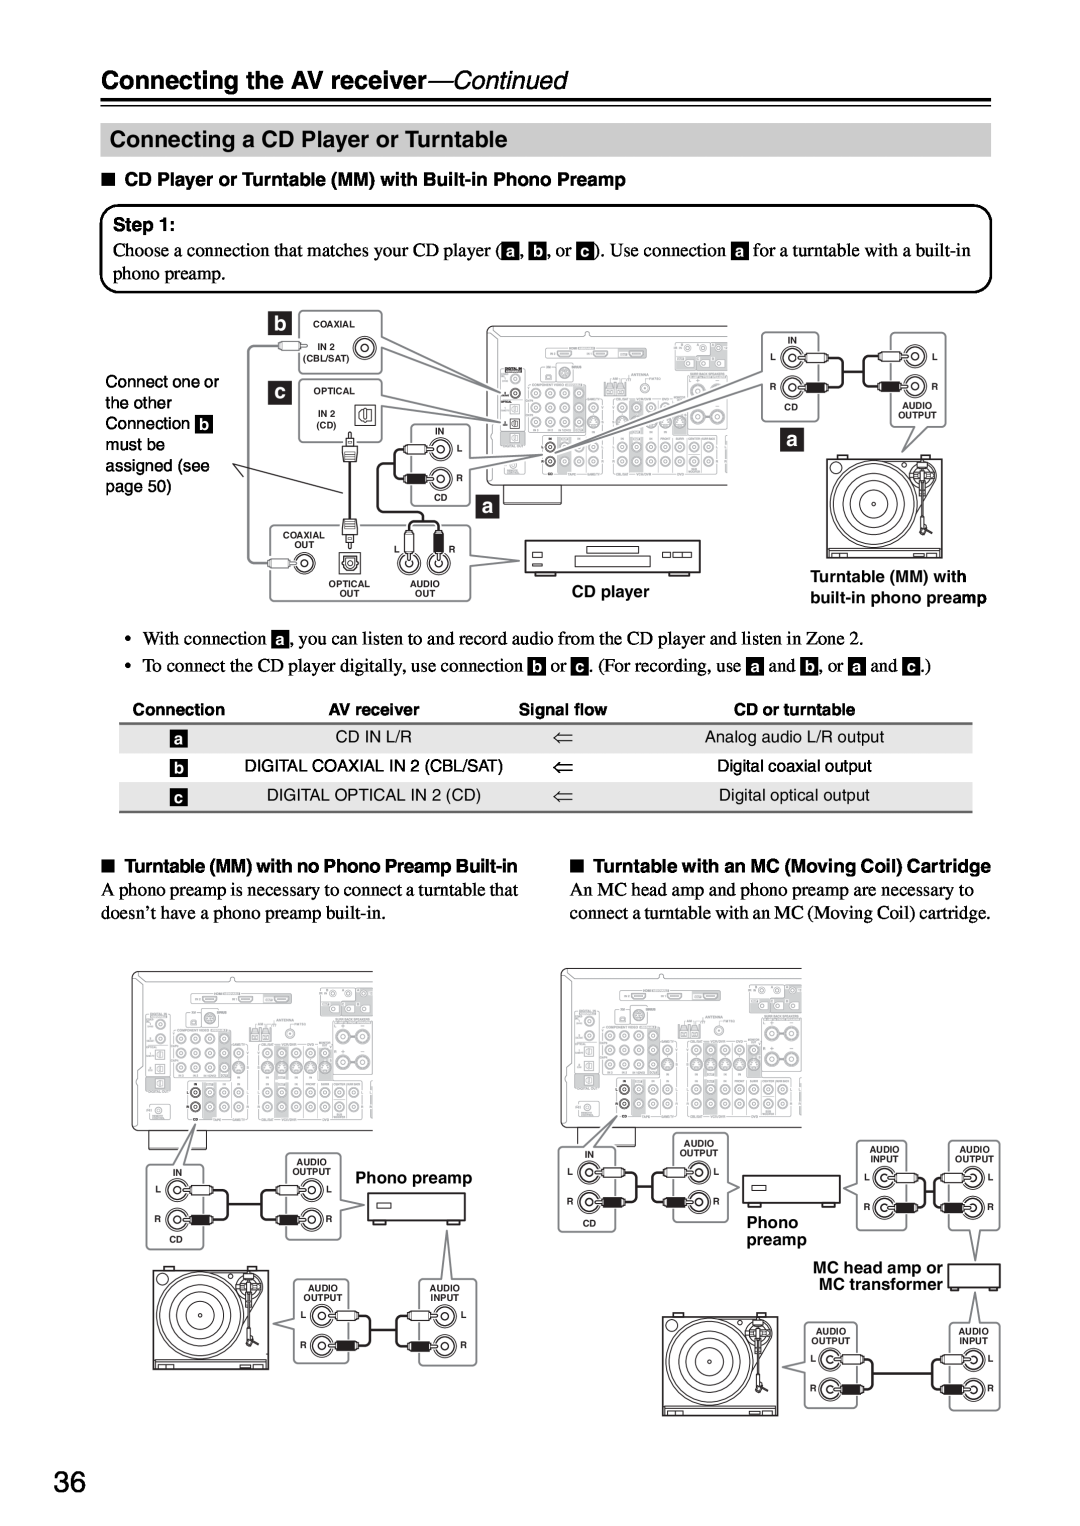 Integra DTR-5.8 instruction manual Connecting a CD Player or Turntable, Connecting the AV receiver—Continued, Step 